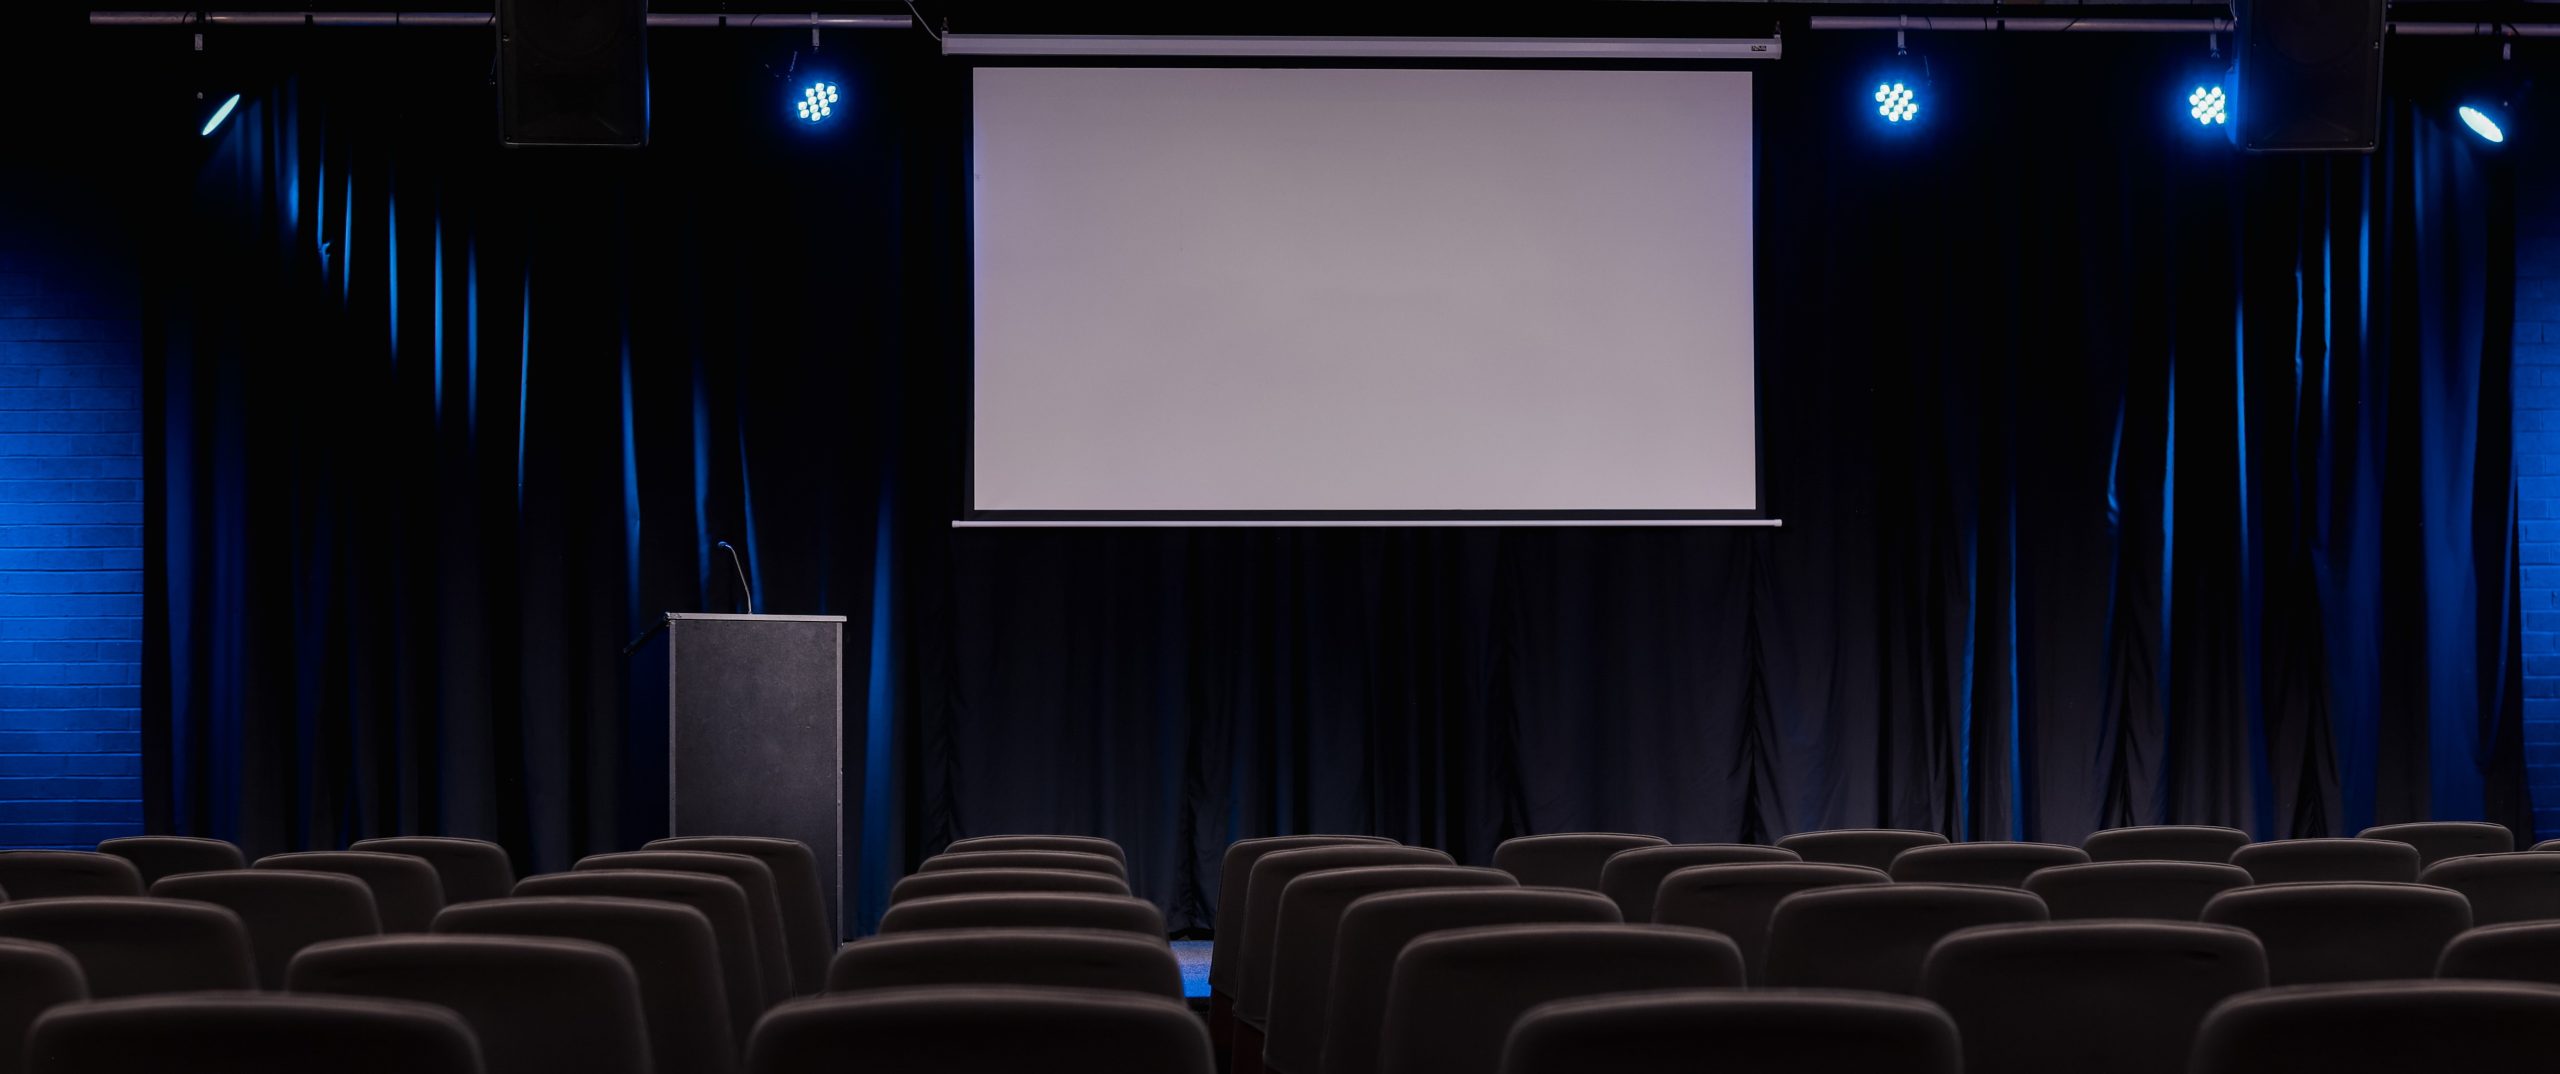 A multimedia hall available for hire in Campbelltown, Sydney.